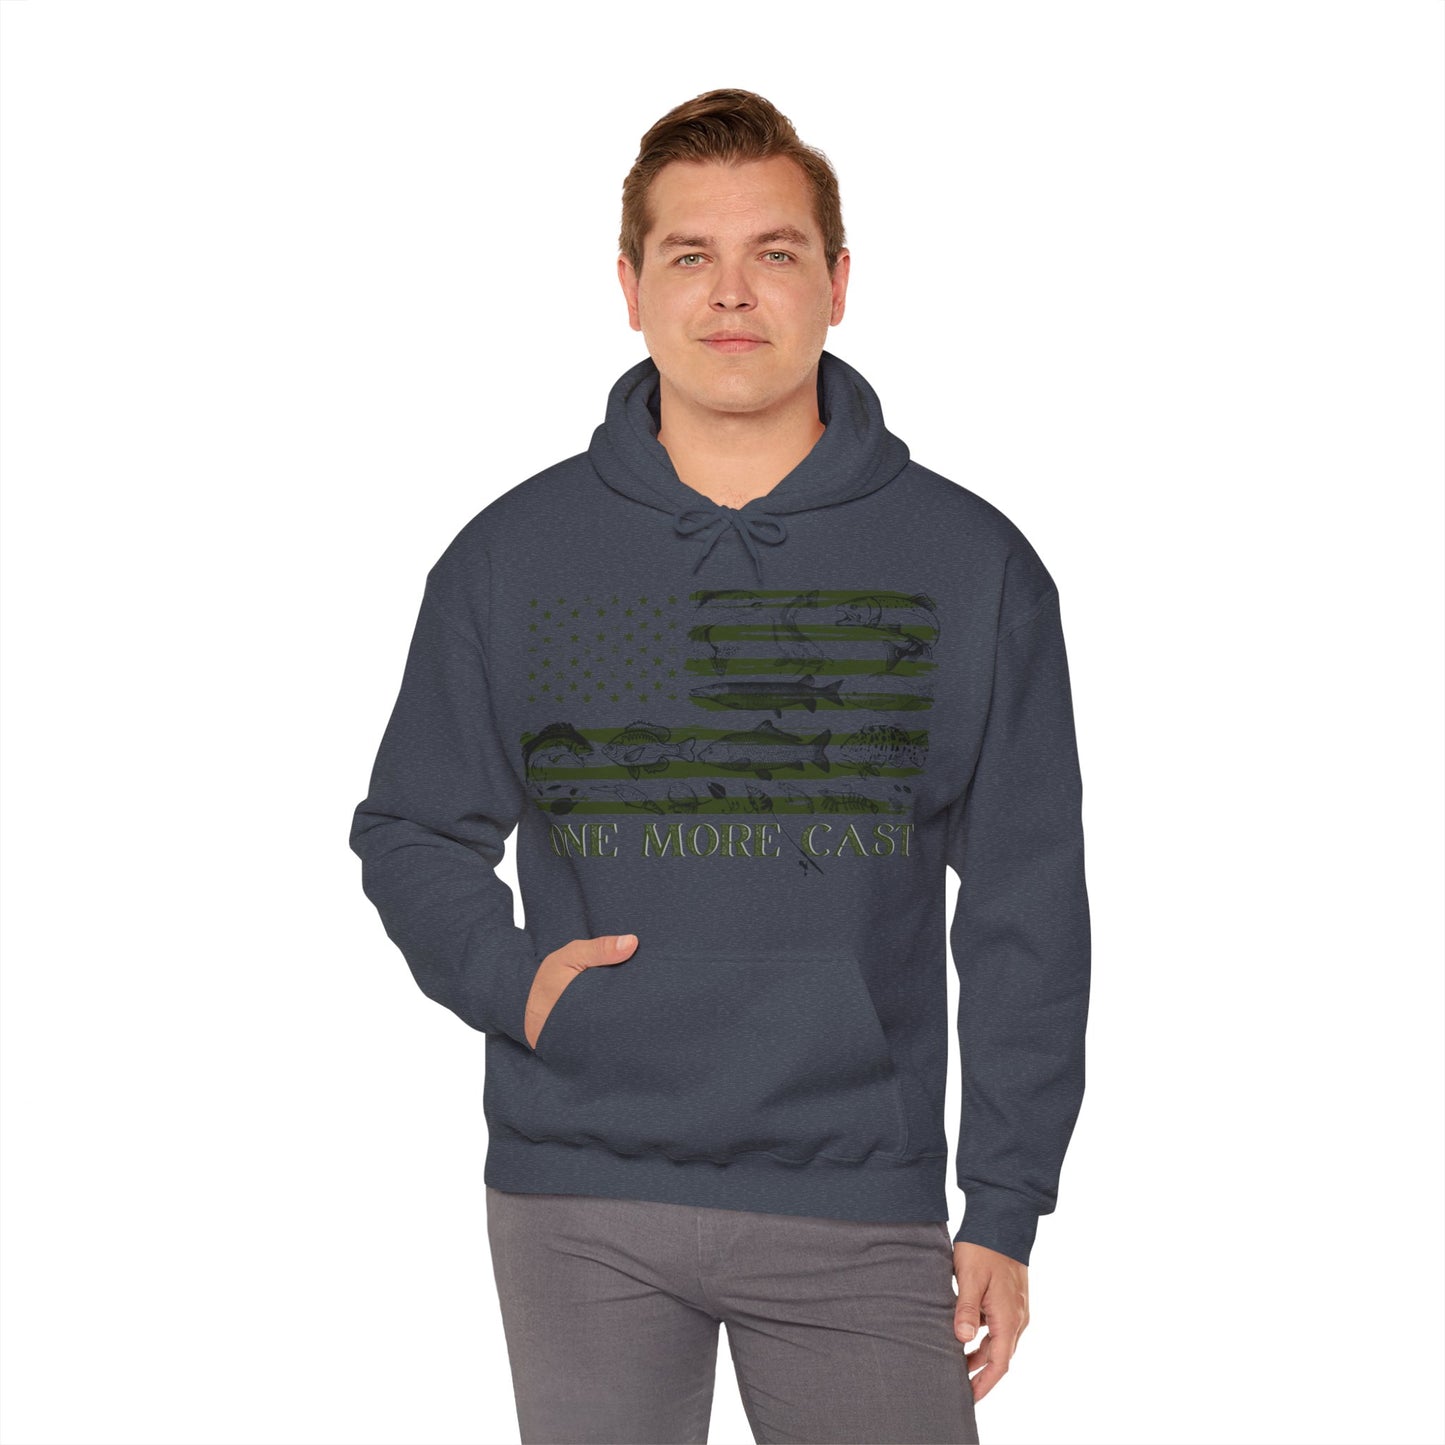 One More Cast Fishing Hoodie